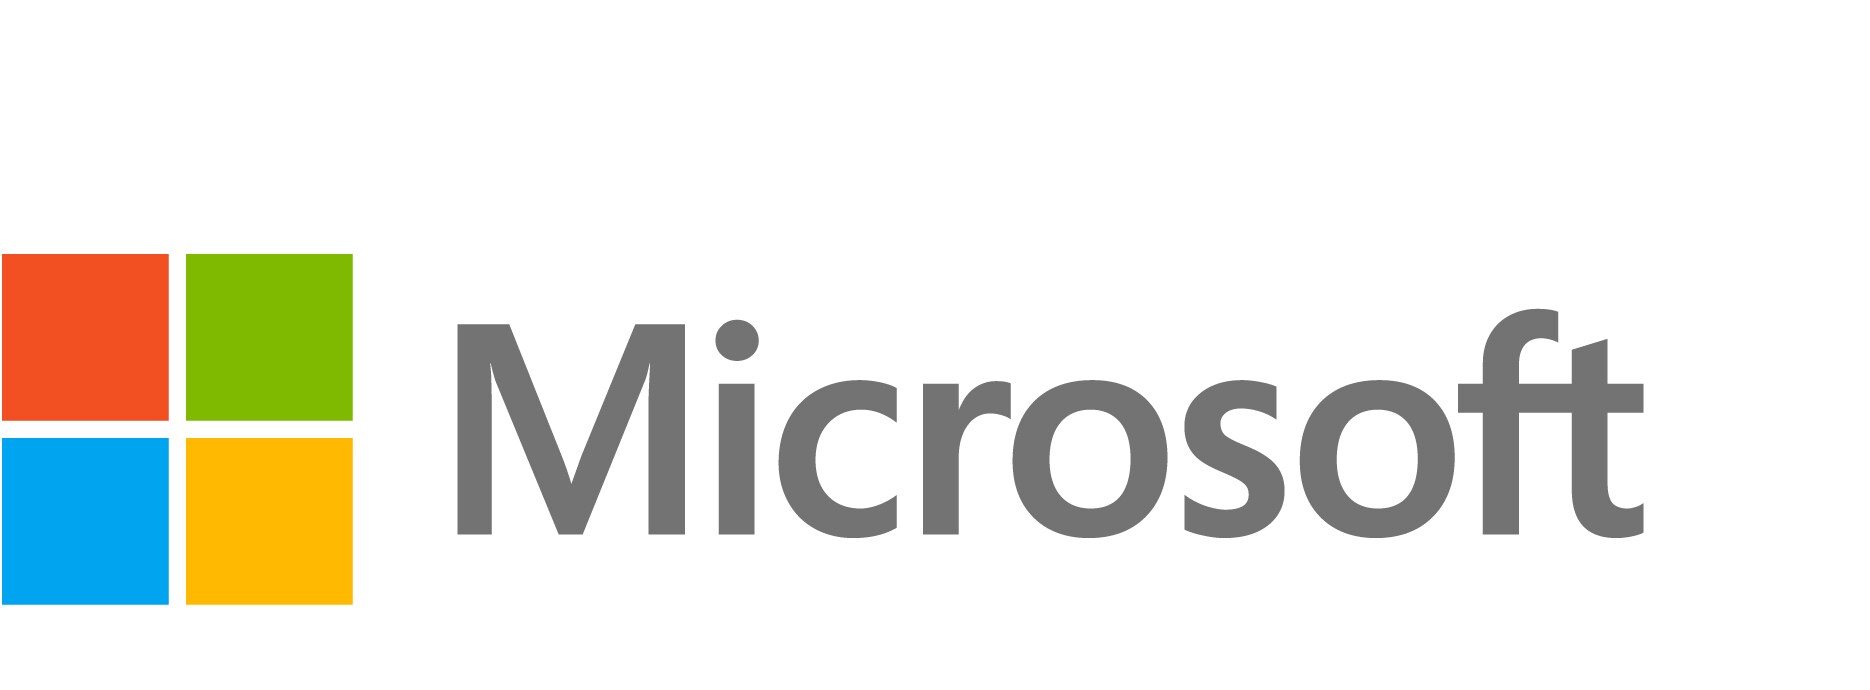 Microsoft Complete for Business with Accidental Damage from Handling - exte